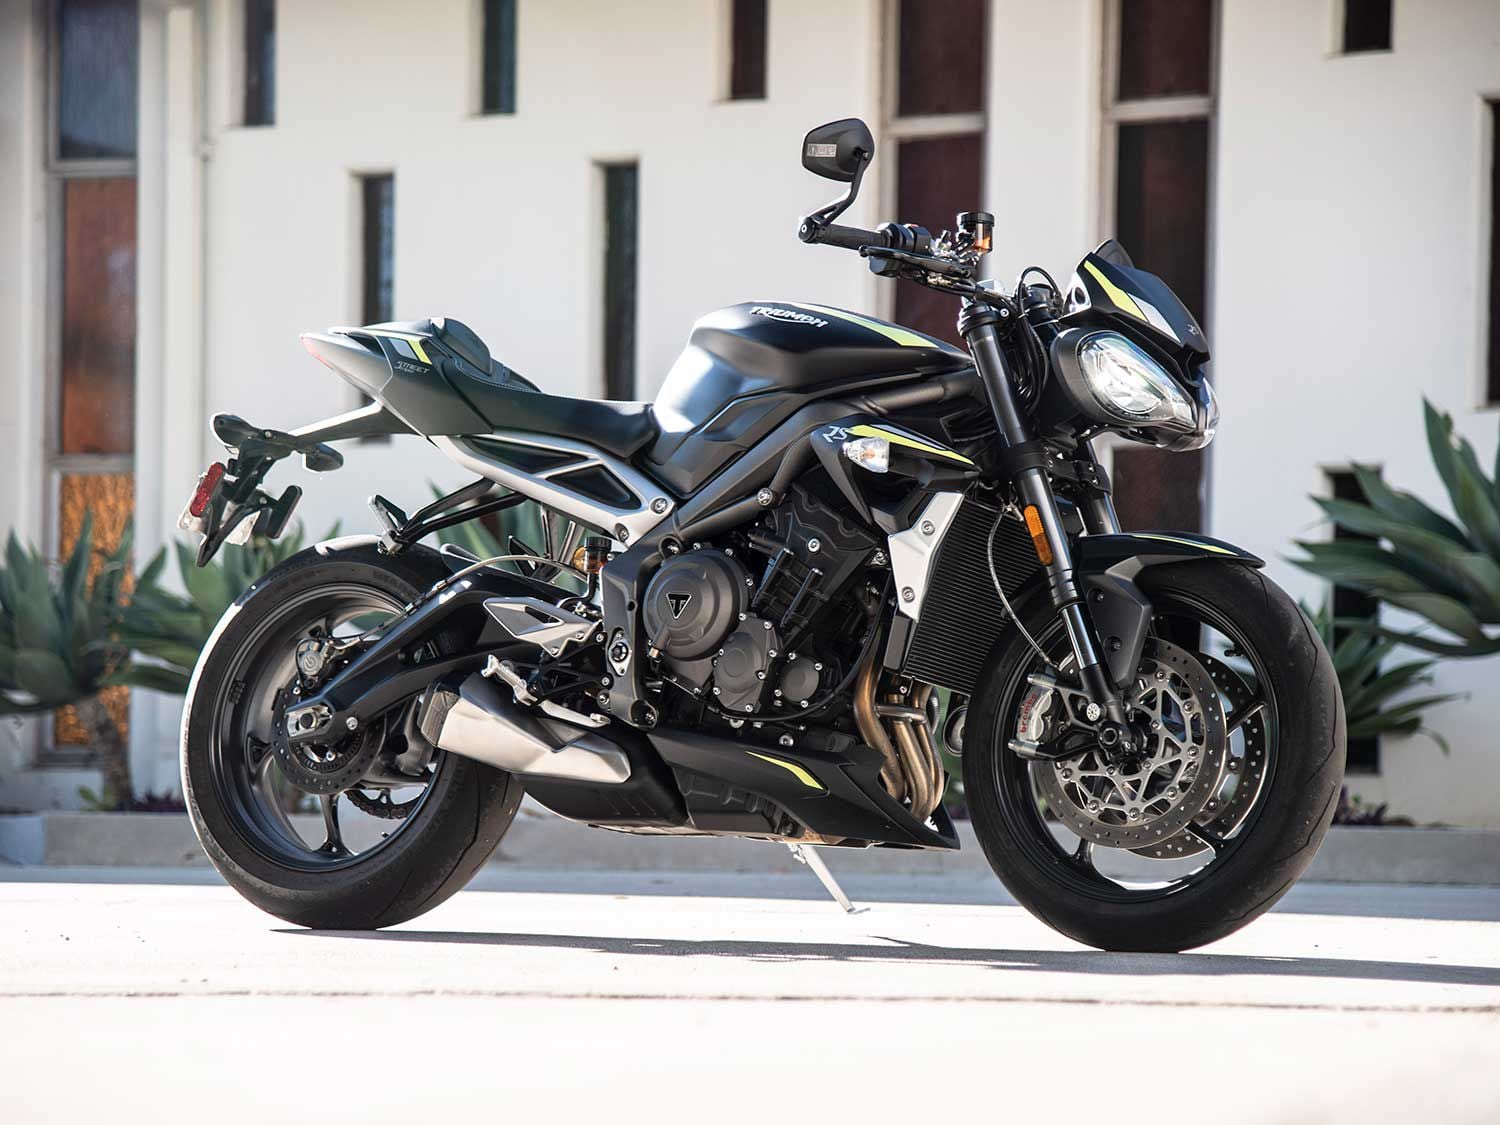 Triumph’s styling has evolved with the latest iteration of the Street Triple, bringing a combination of rounded-off corners and angular lines.